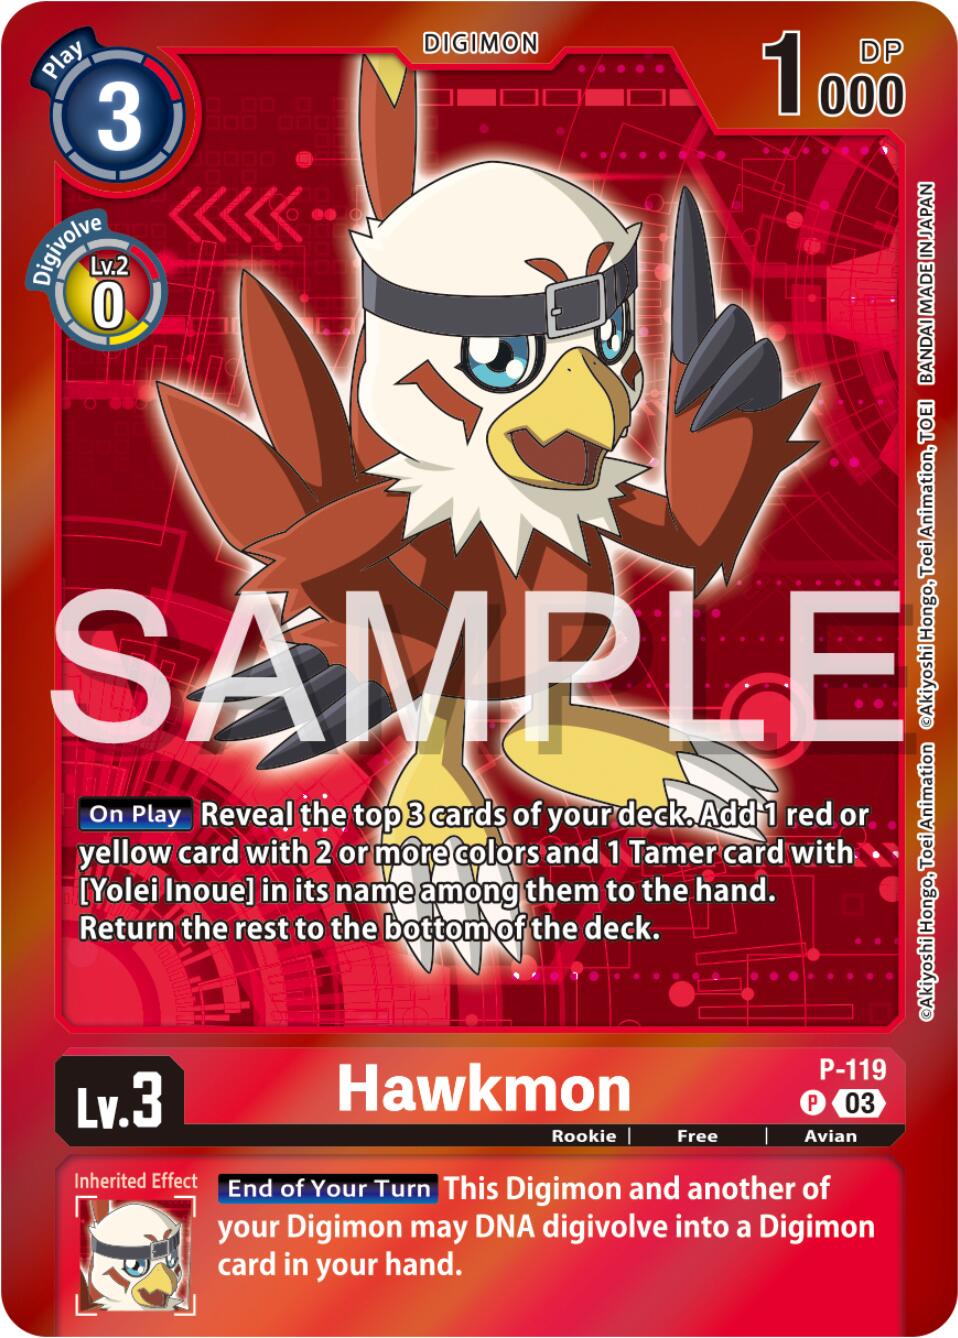 Hawkmon [P-119] - P-119 (Digimon Adventure Box 2024) [Promotional Cards] | Red Riot Games CA